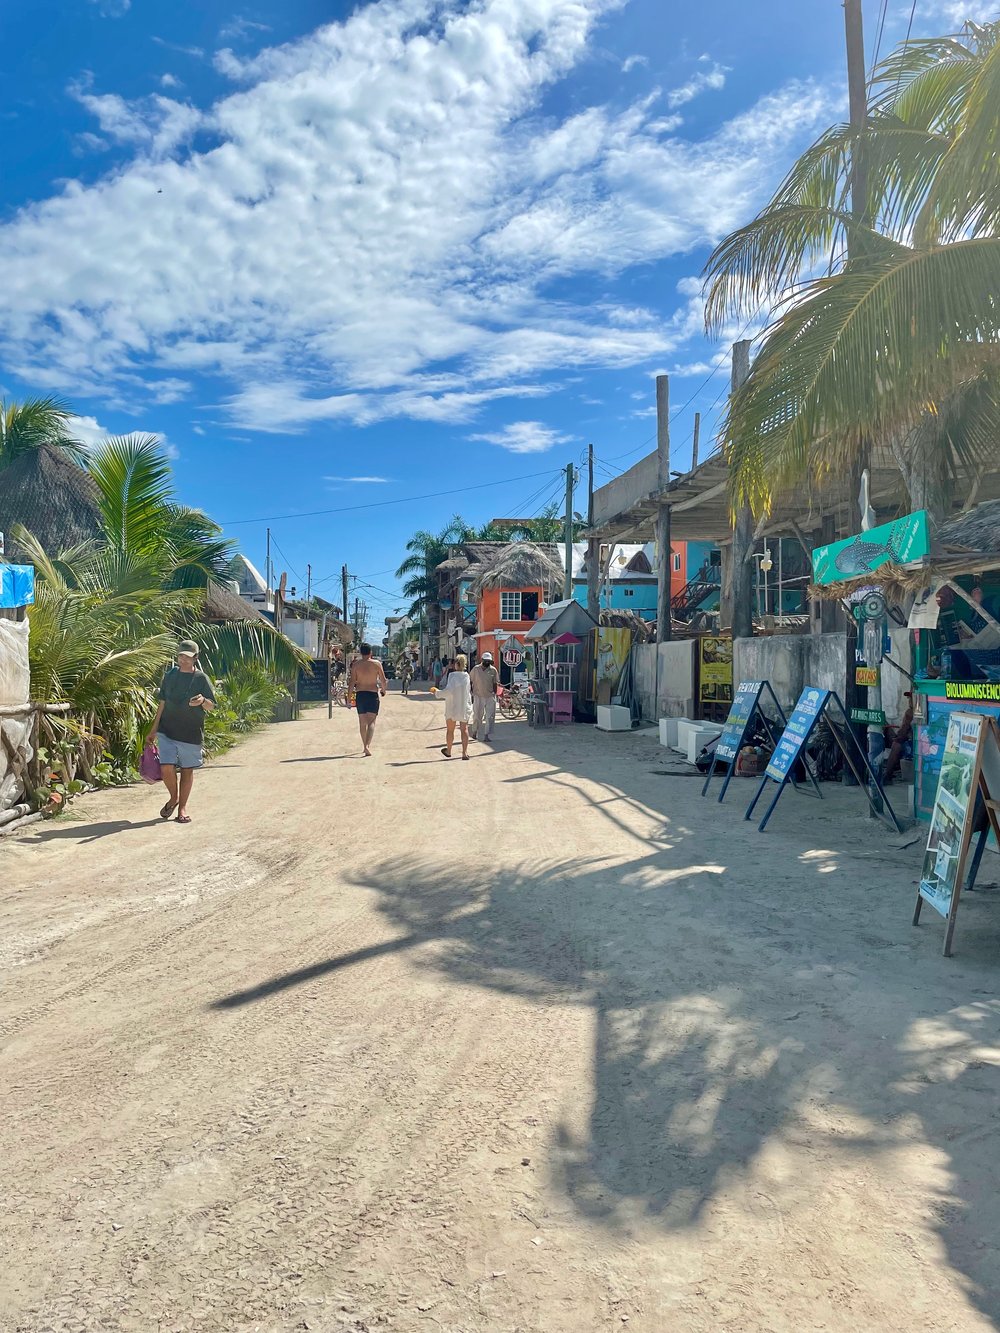 The streets of Isla Holbox